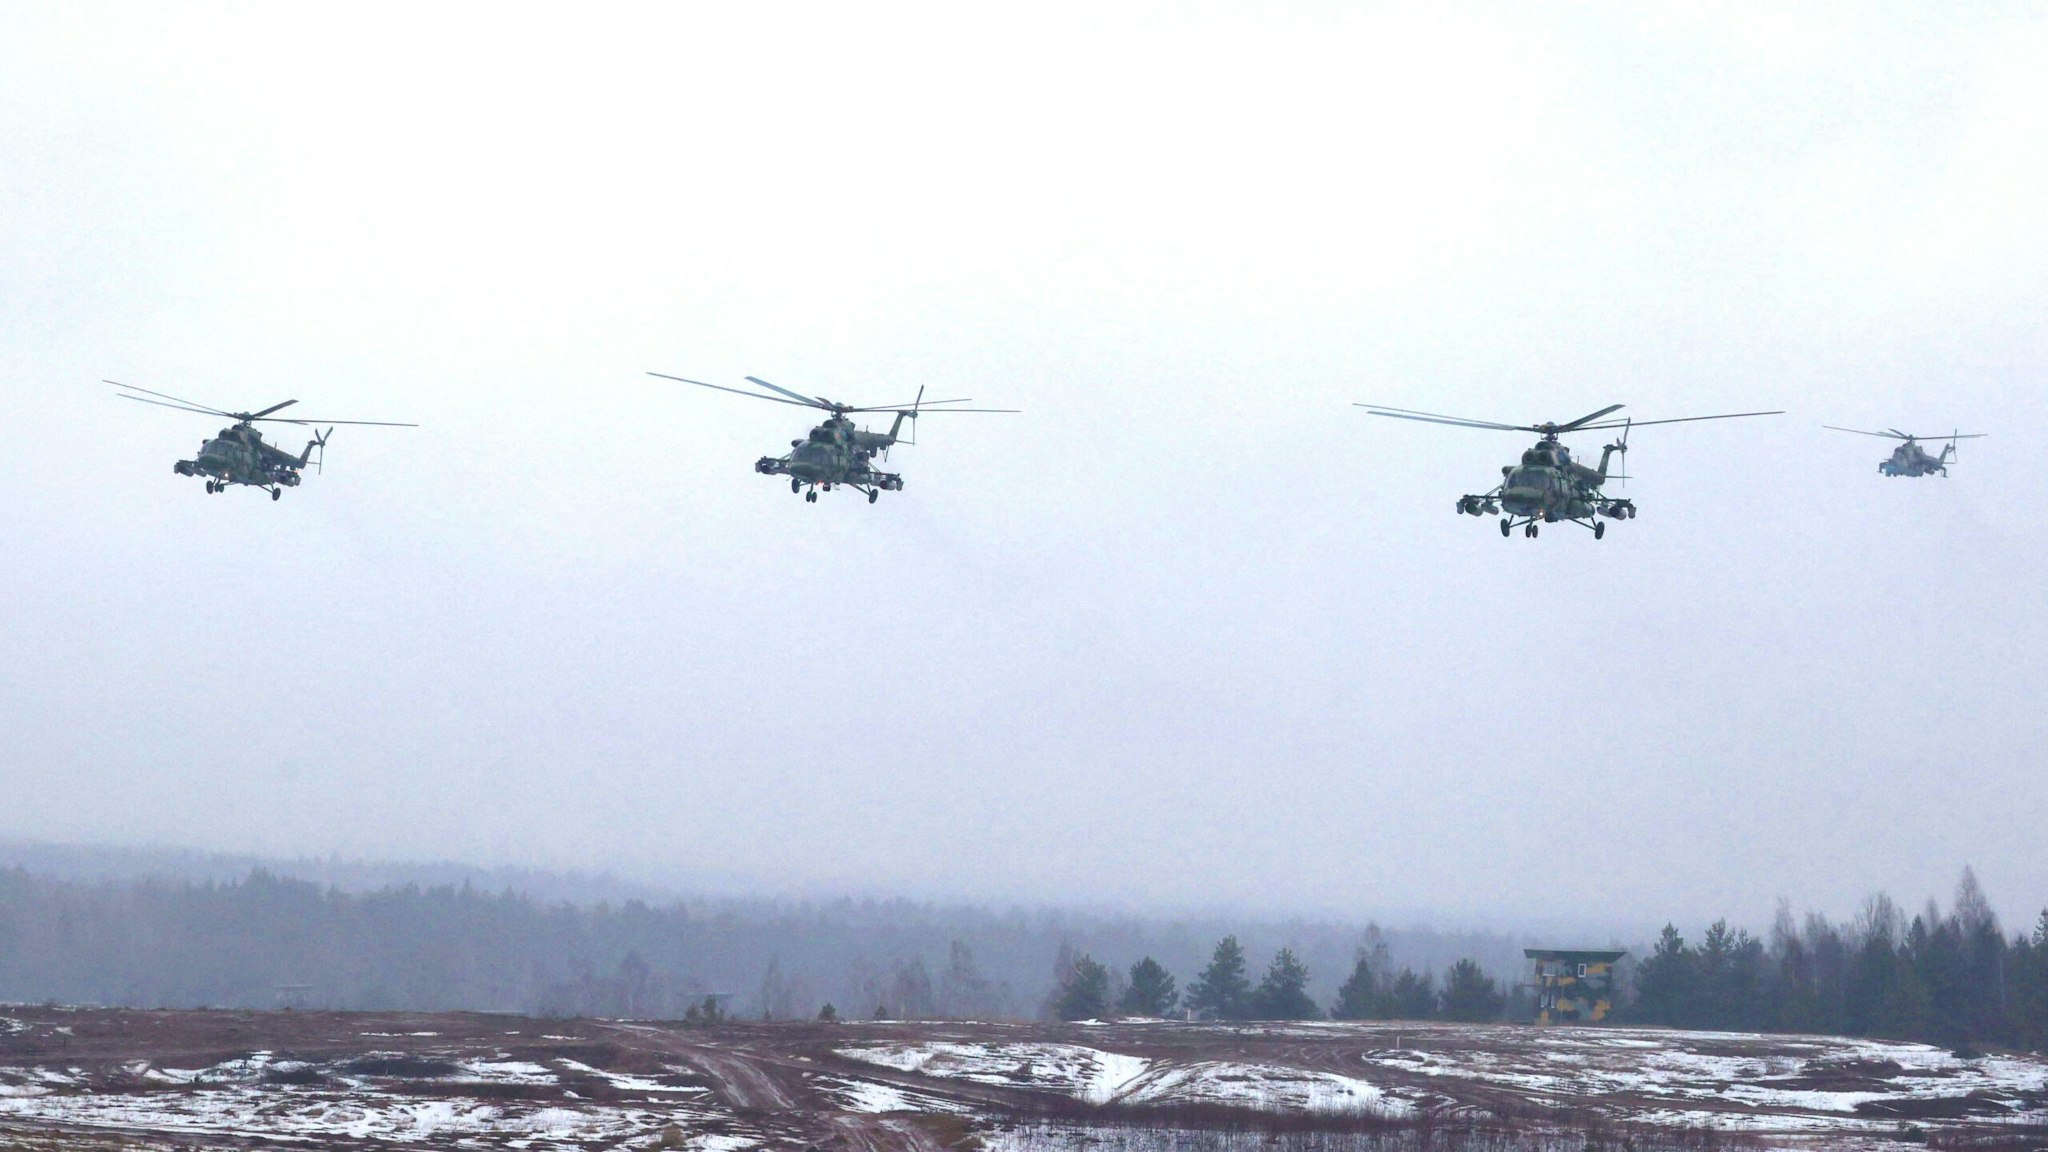 Belarusian Mil Mi-8MTV-5 military helicopters fly over a field during joint exercises of the armed forces of Russia and Belarus as part of an inspection of the Union State's Response Force, at a firing range near a town of Osipovichi outside Minsk on February 17, 2022.